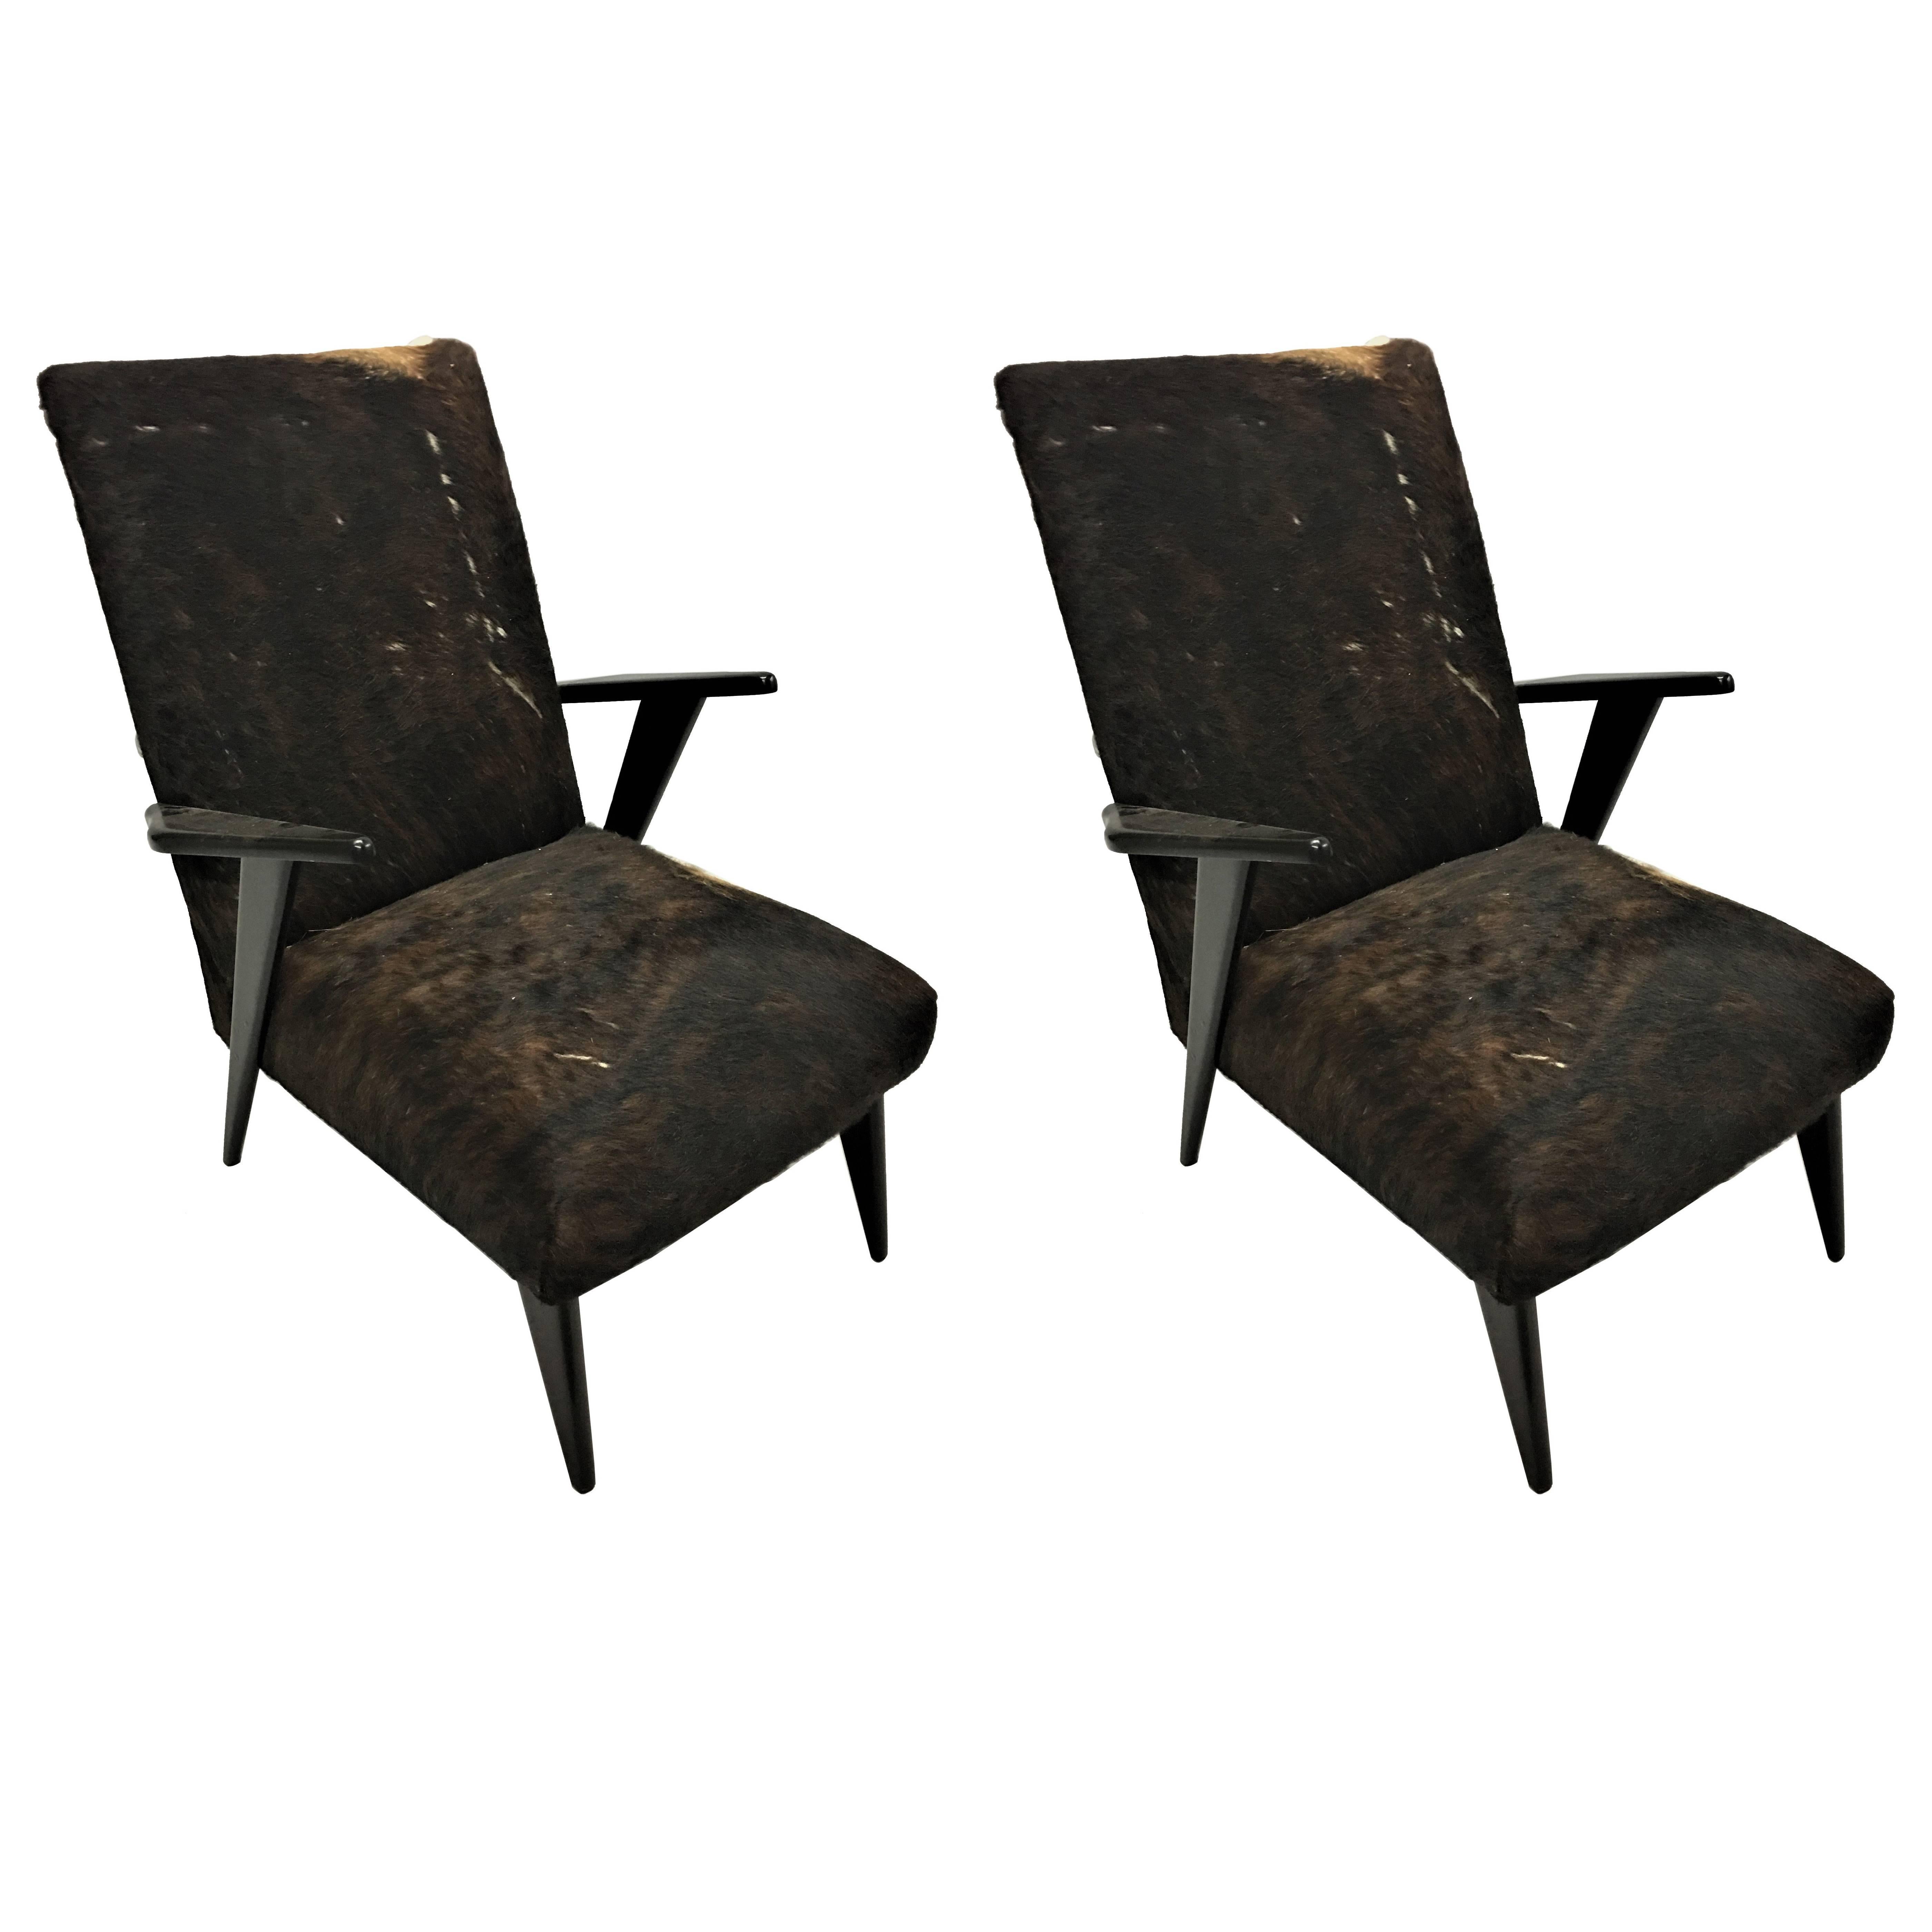 Pair of Italian Mid-Century Modern Lounge Chairs Attributed to Ico Parisi